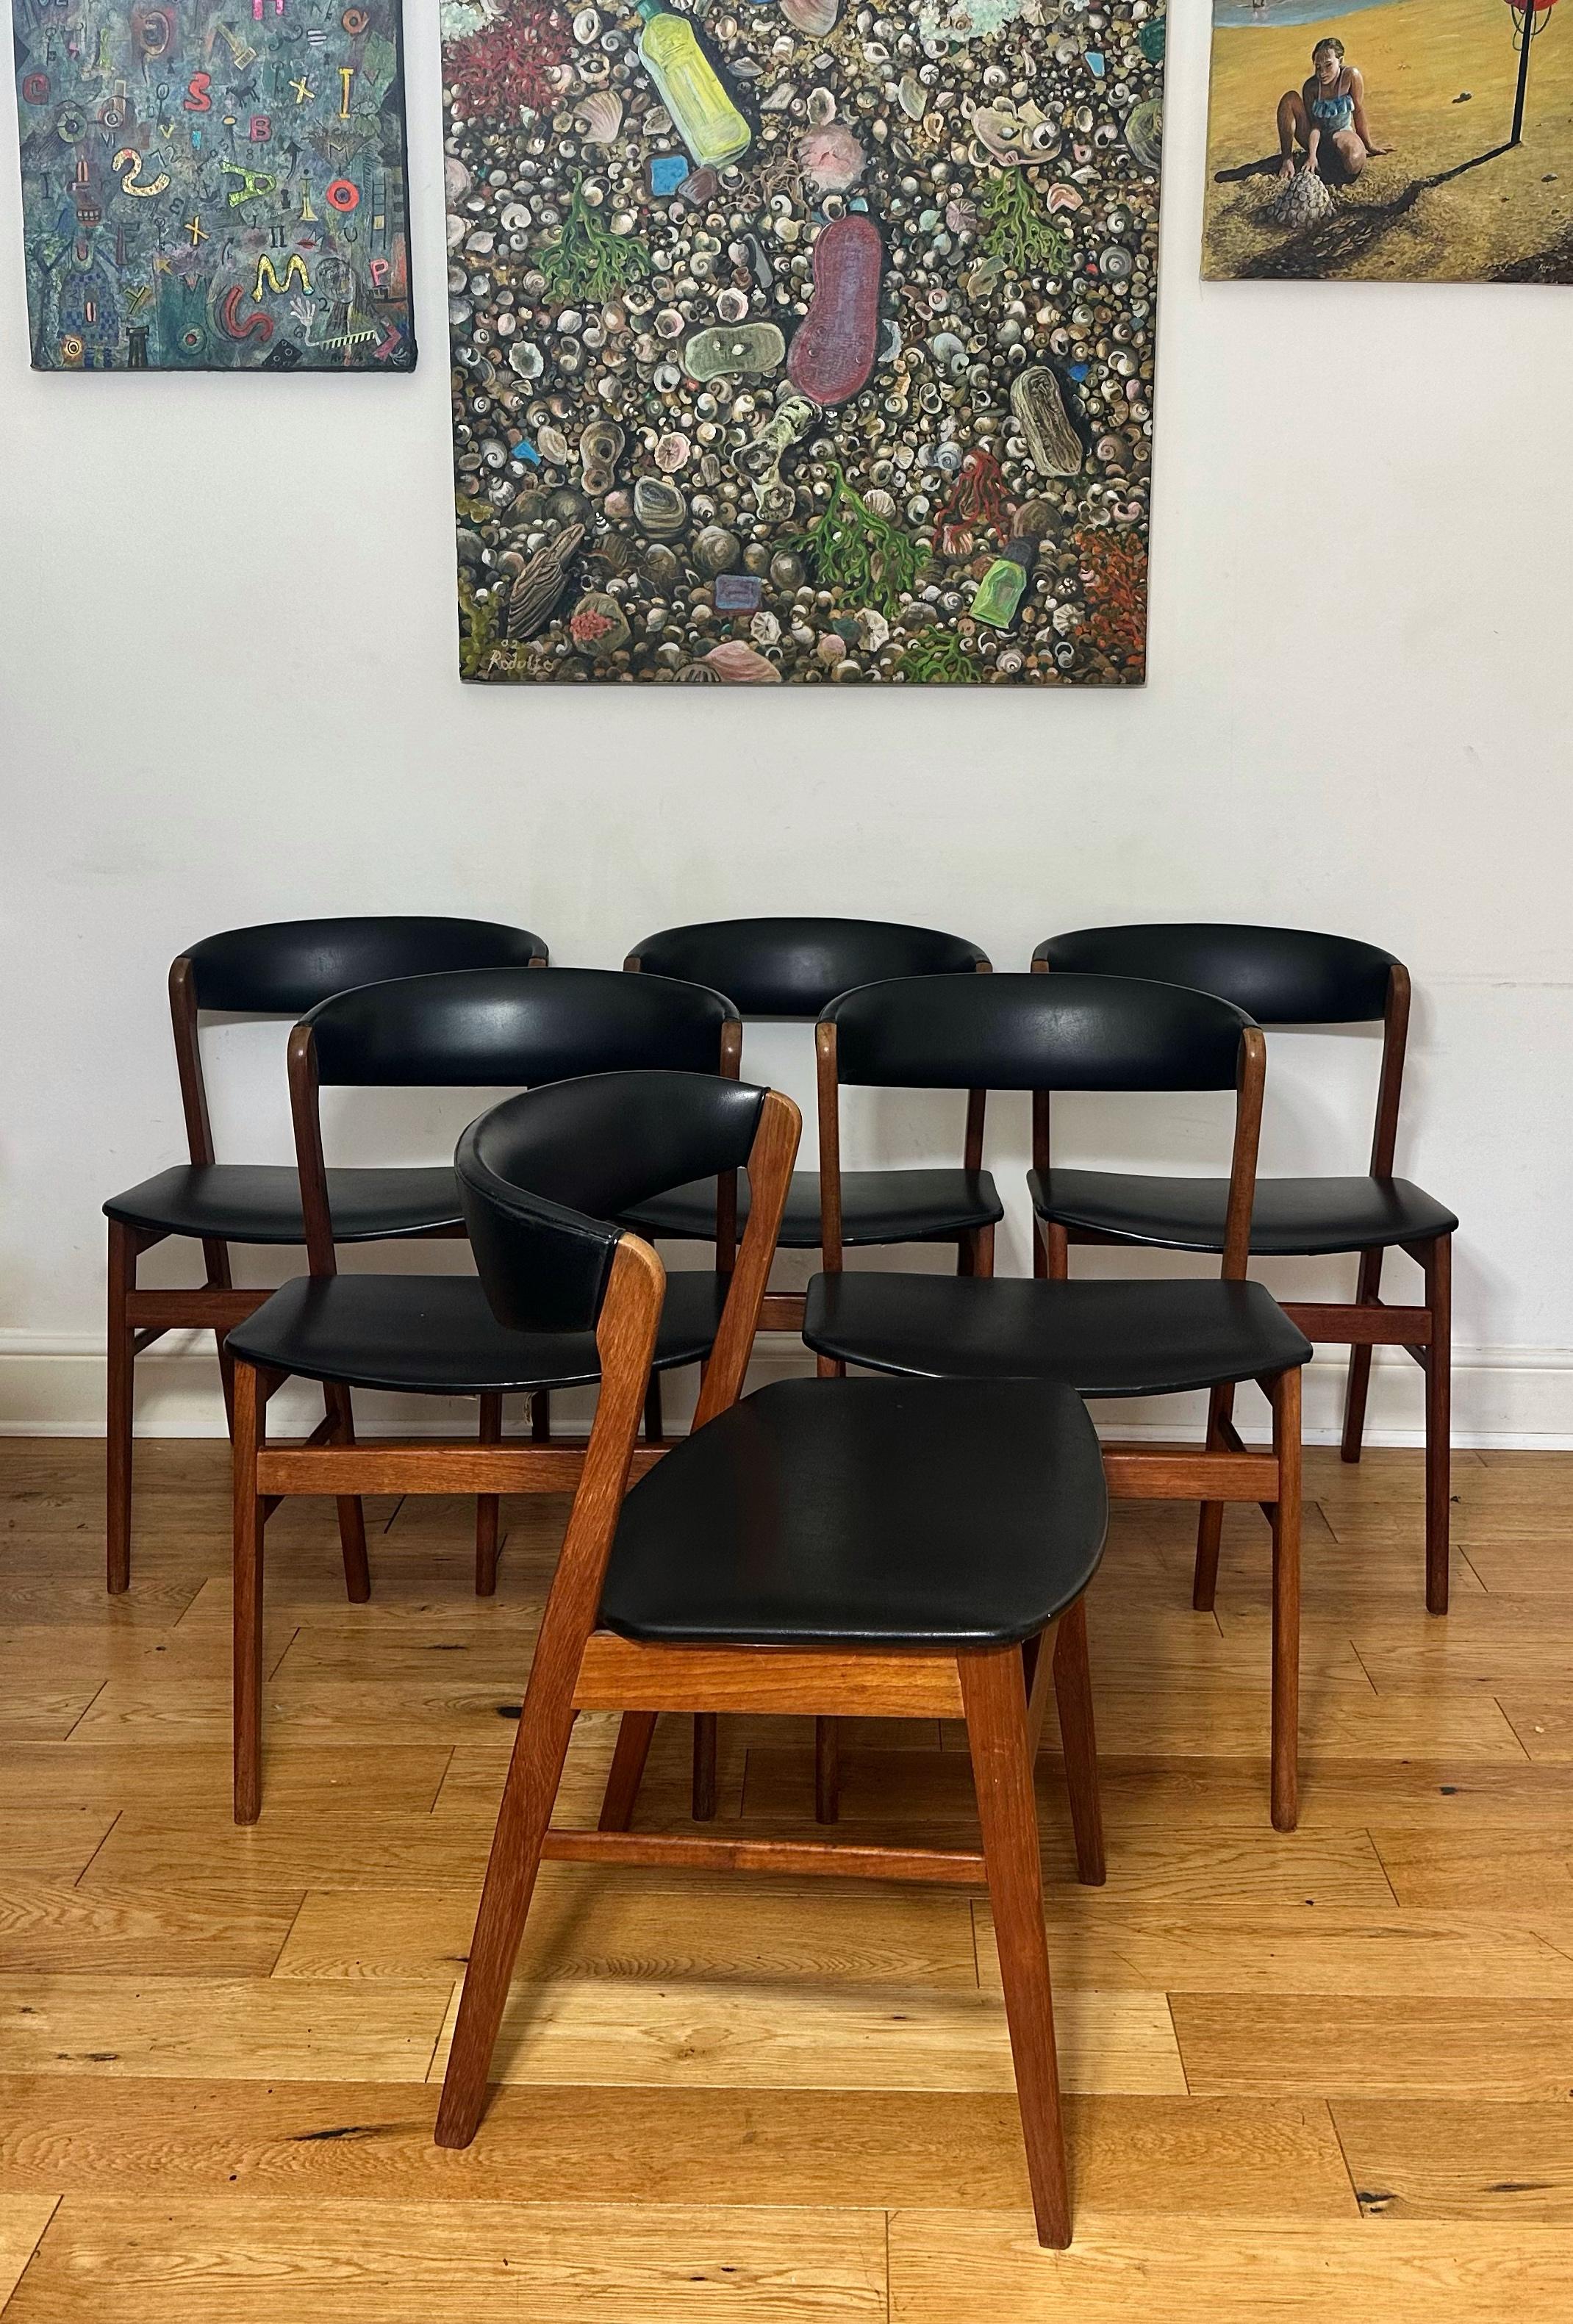 Stunning Mid-century modern Danish set of six dining chairs by Sax. Solid teak frame, very sturdy. The seats are covered in the original black vinyl which is in great condition. Beautifully designed with rich teak grain throughout and angled frame.